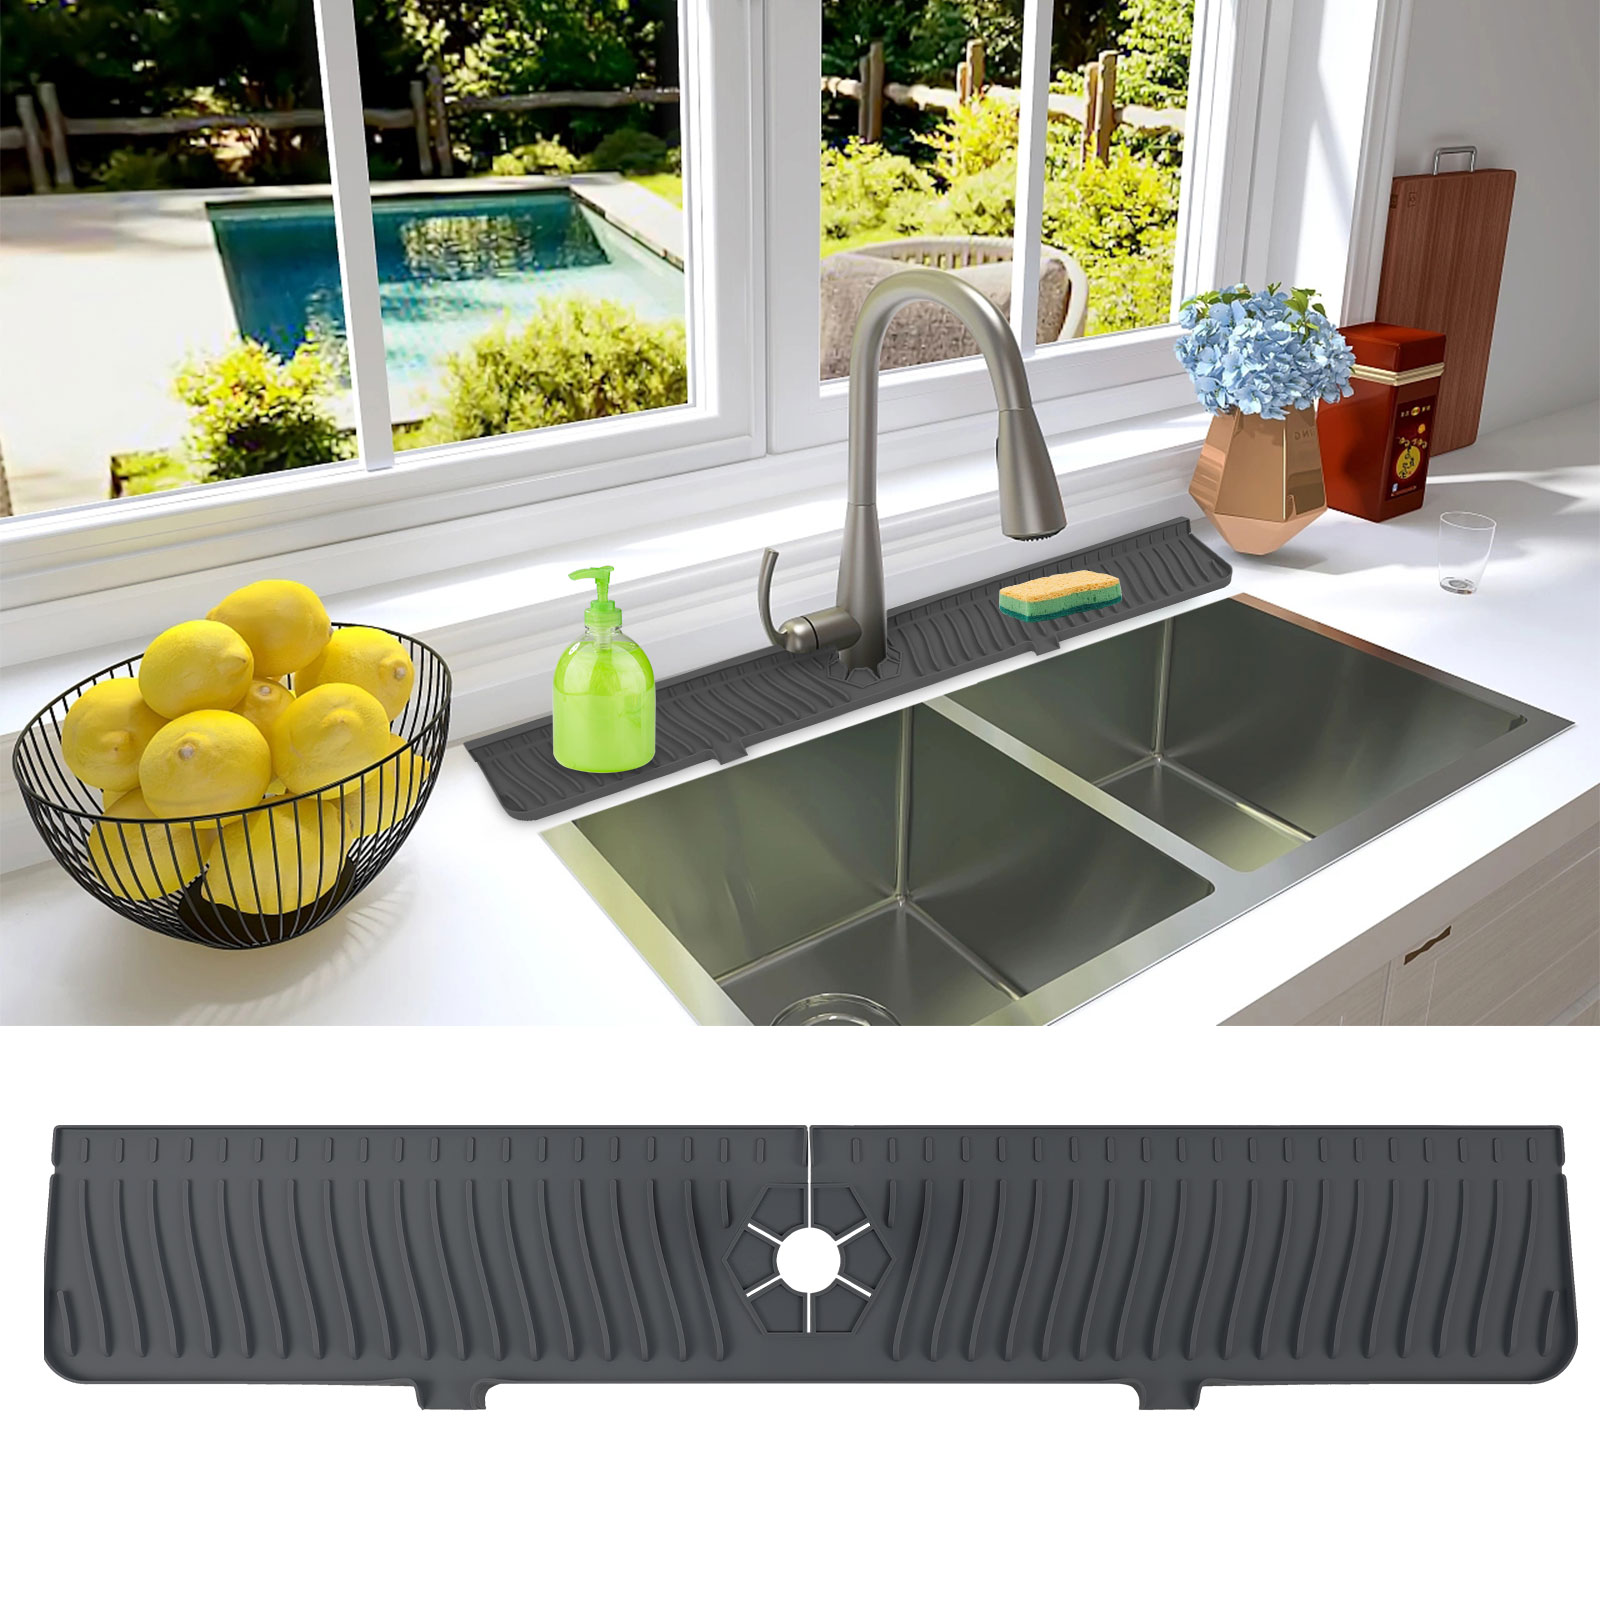 30x5.5 Inch Silicone Sink Faucet Mat for Kitchen Bathroom, 76cm Kitchen  Sink Splash Guard, Bathroom Faucet Drain Mat Handle Drip Catcher Tray,  Countertop Protector Absorbent Drying Pad Black 